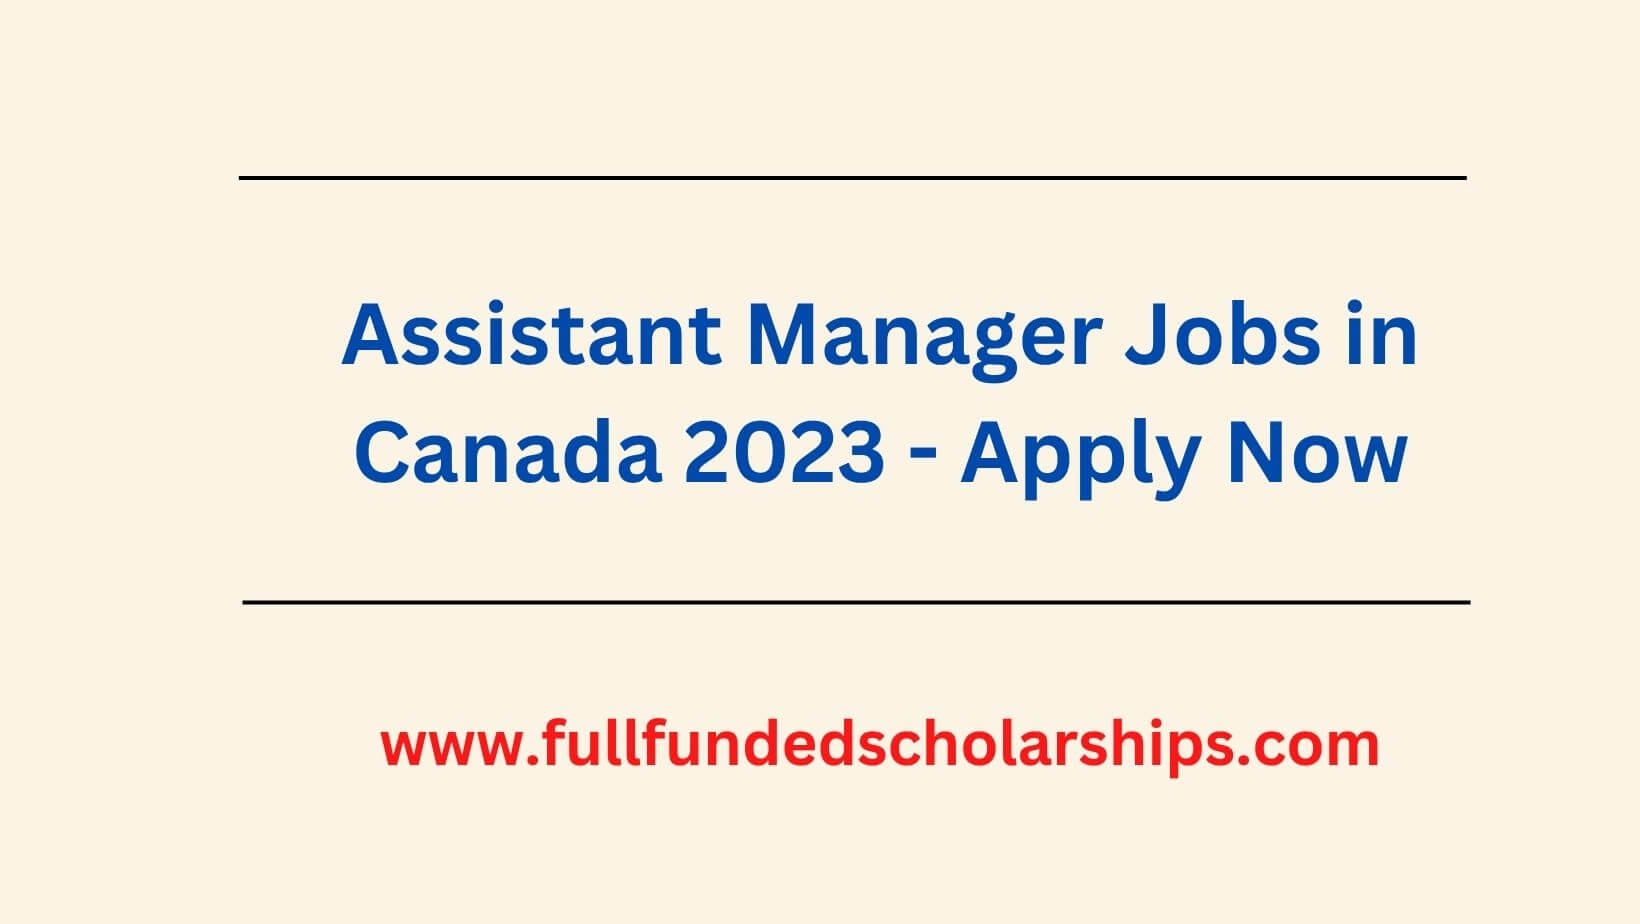 Assistant Manager Jobs in Canada 2023